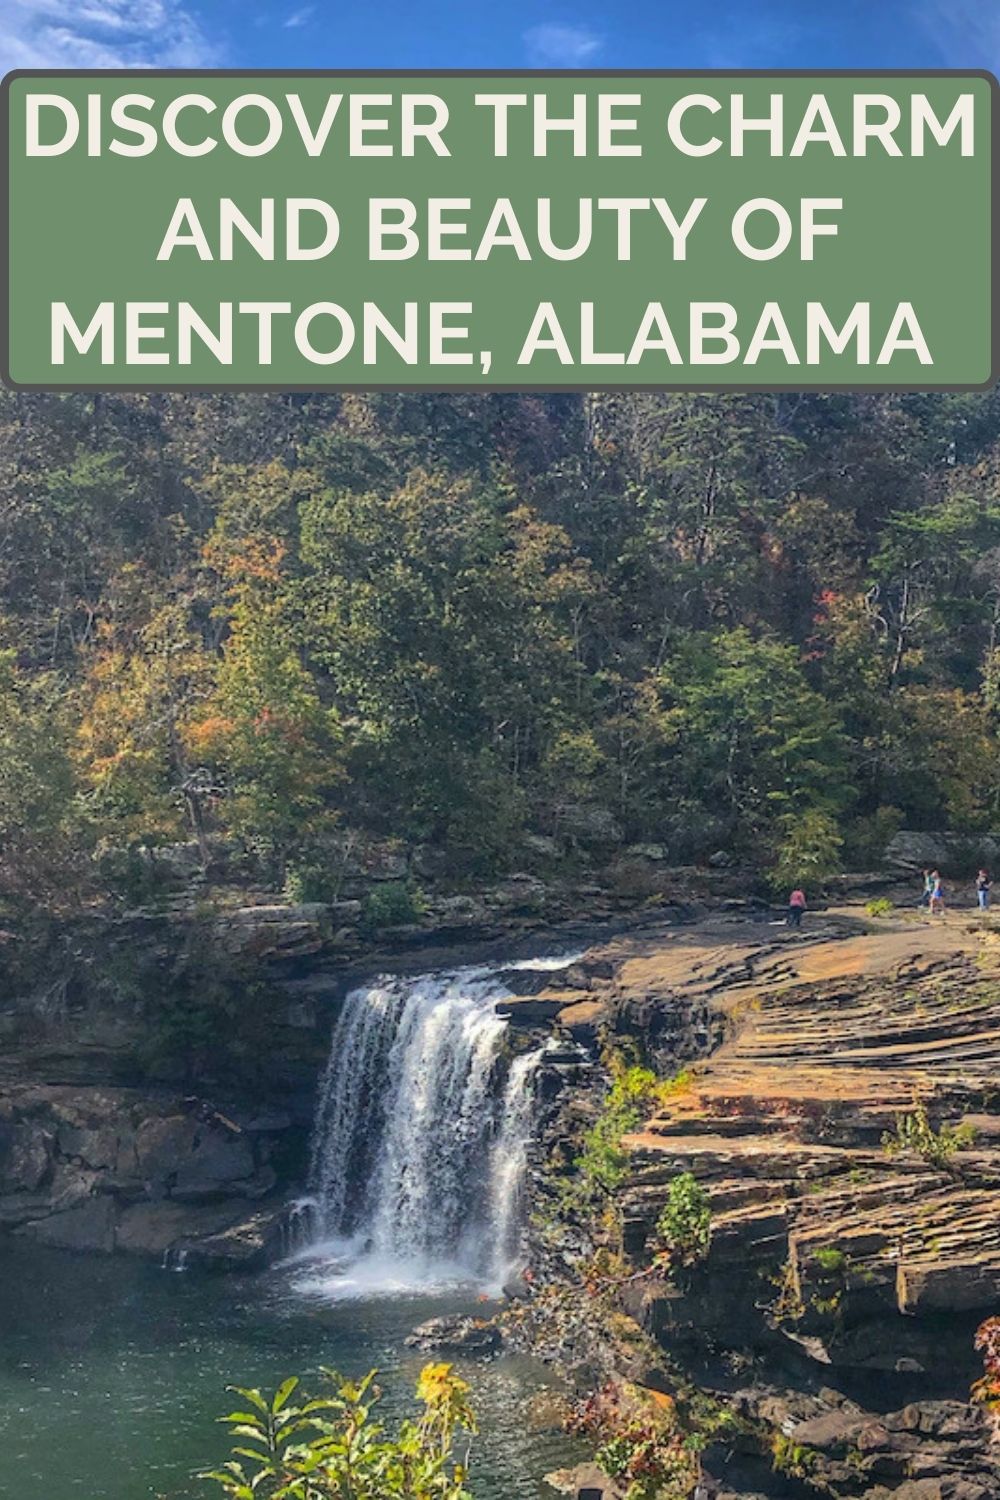 Discover the Charm and Beauty of Mentone Alabama